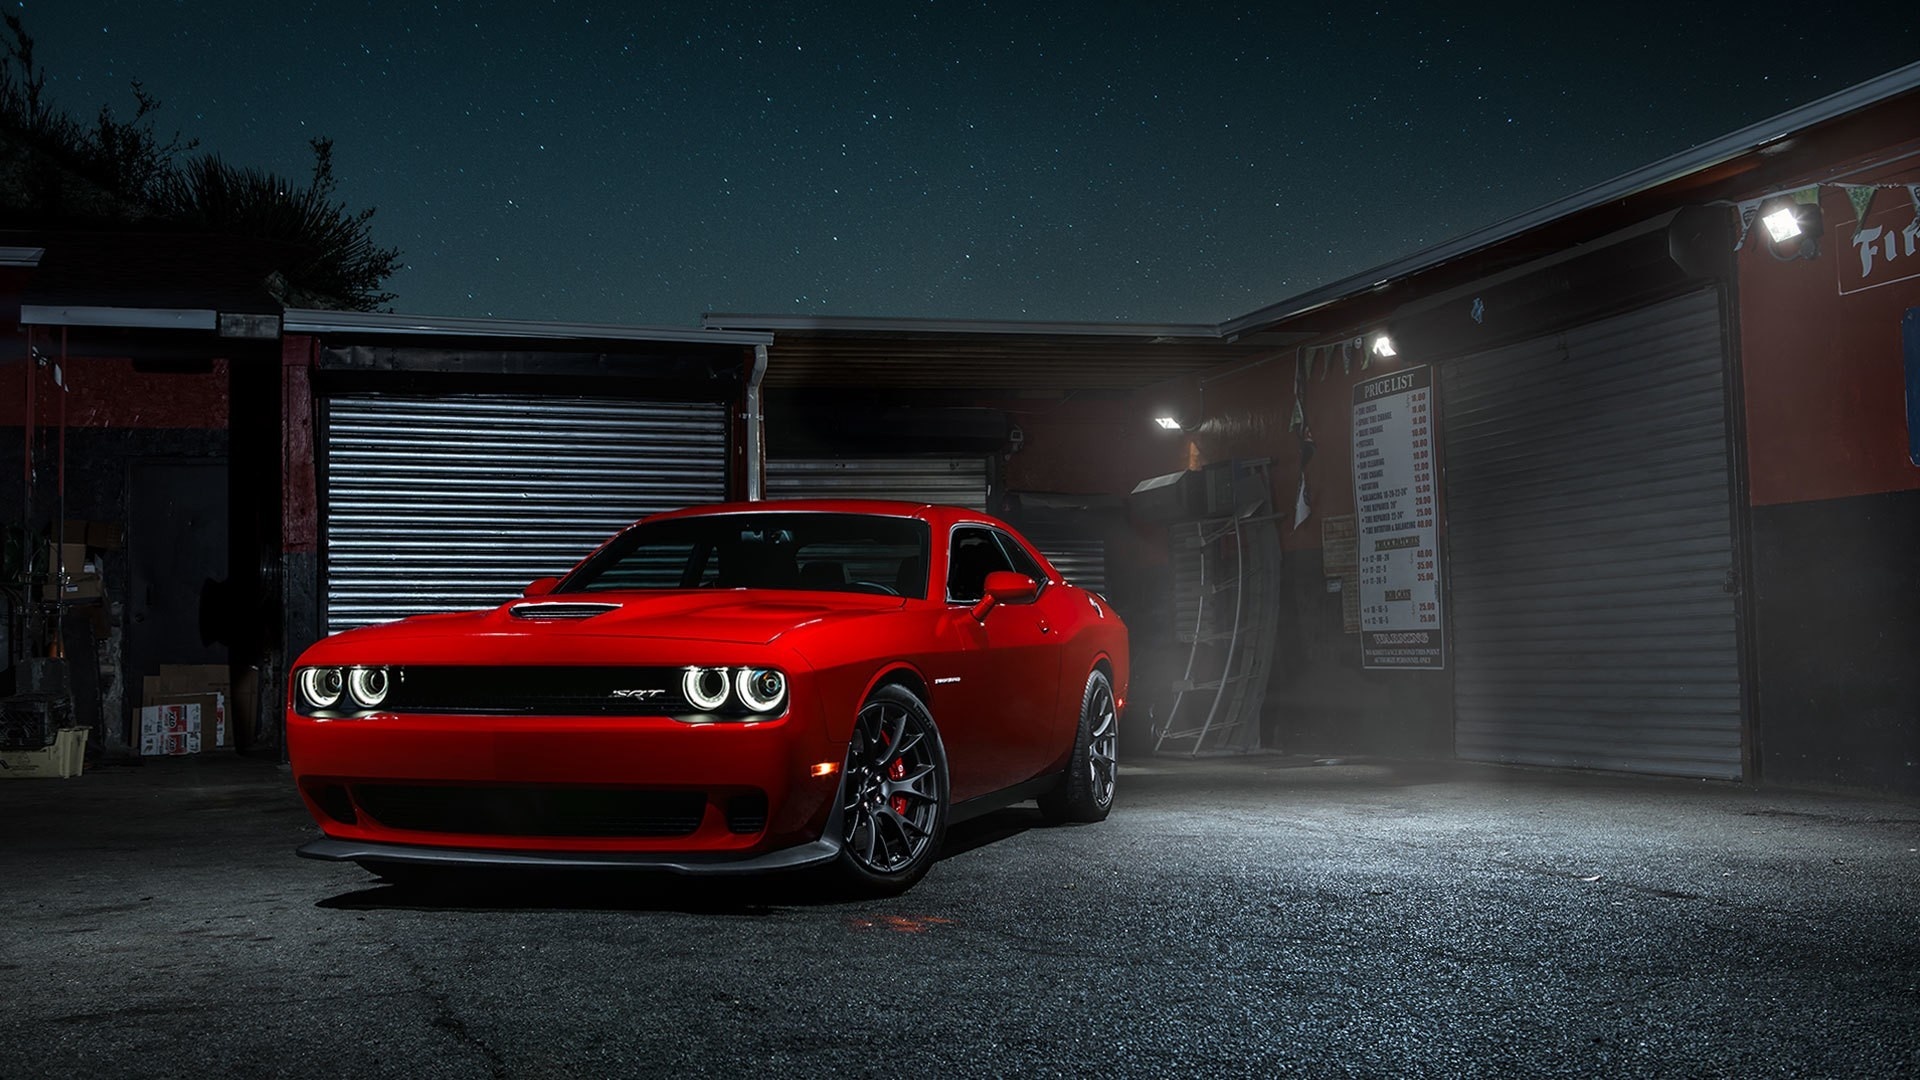 Dodge Challenger, Red sports car, Powerful performance, Luxury and style, 1920x1080 Full HD Desktop